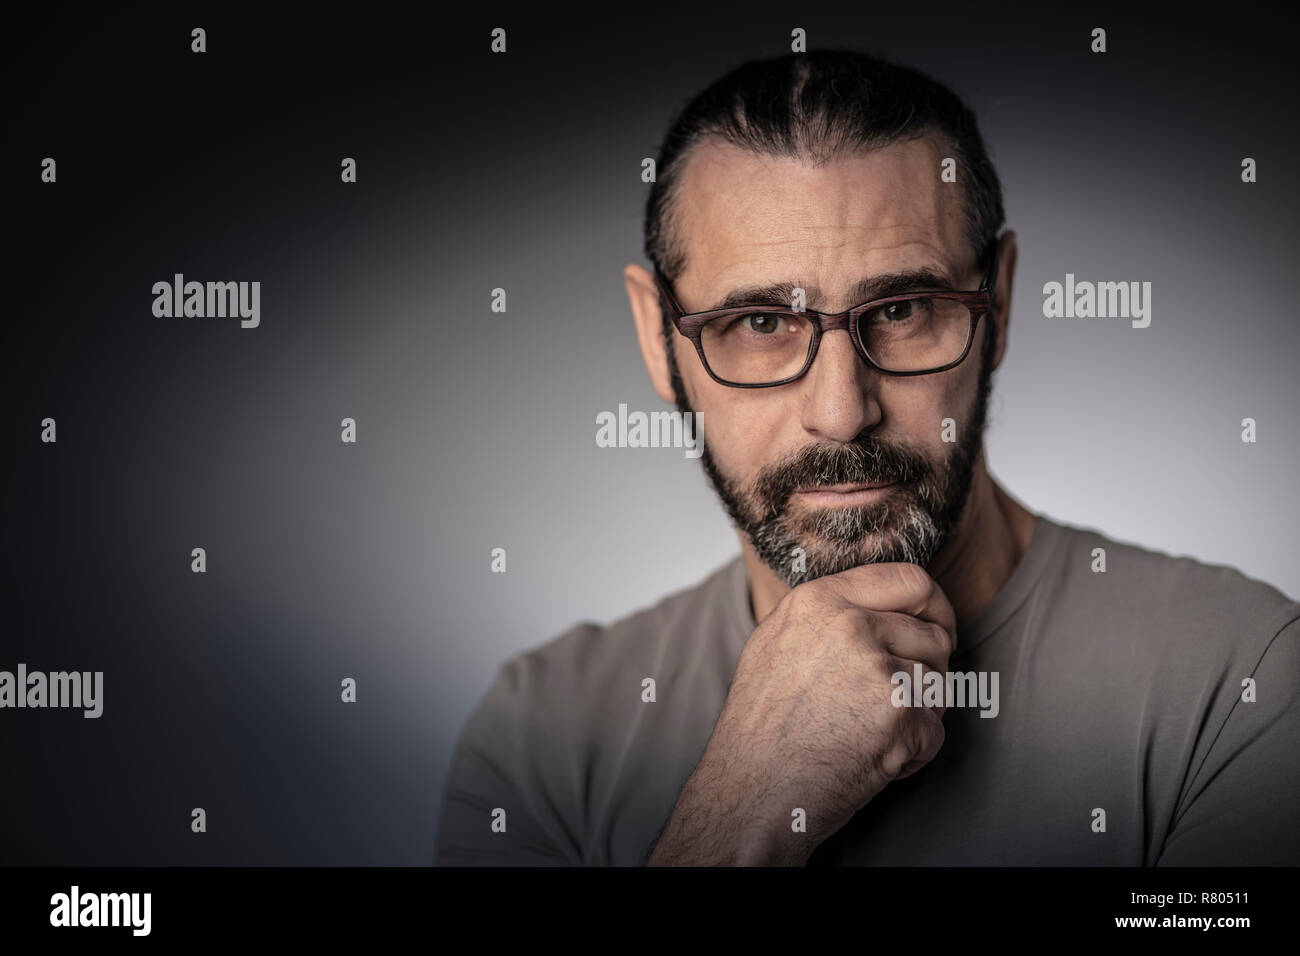 portrait of man with long hair and glasses studio shot thinking position Stock Photo